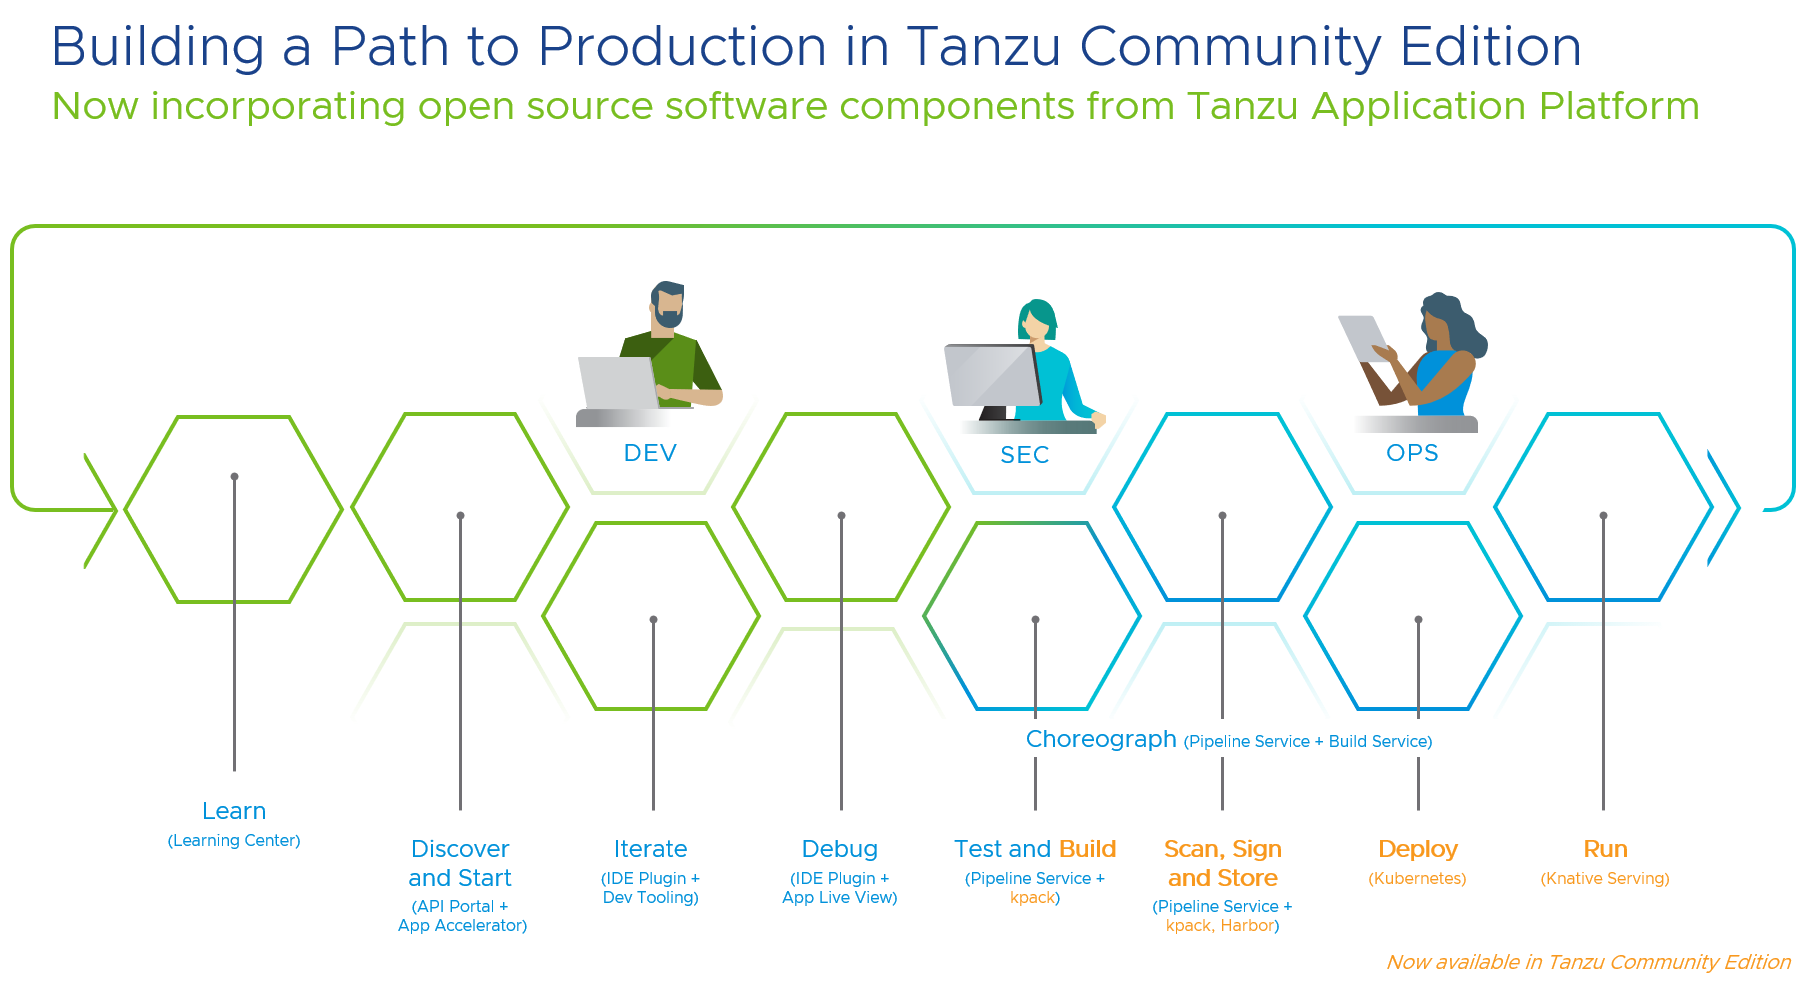 VMware Tanzu Community Edition Deepens Appeal to Developers with Container Build Automation